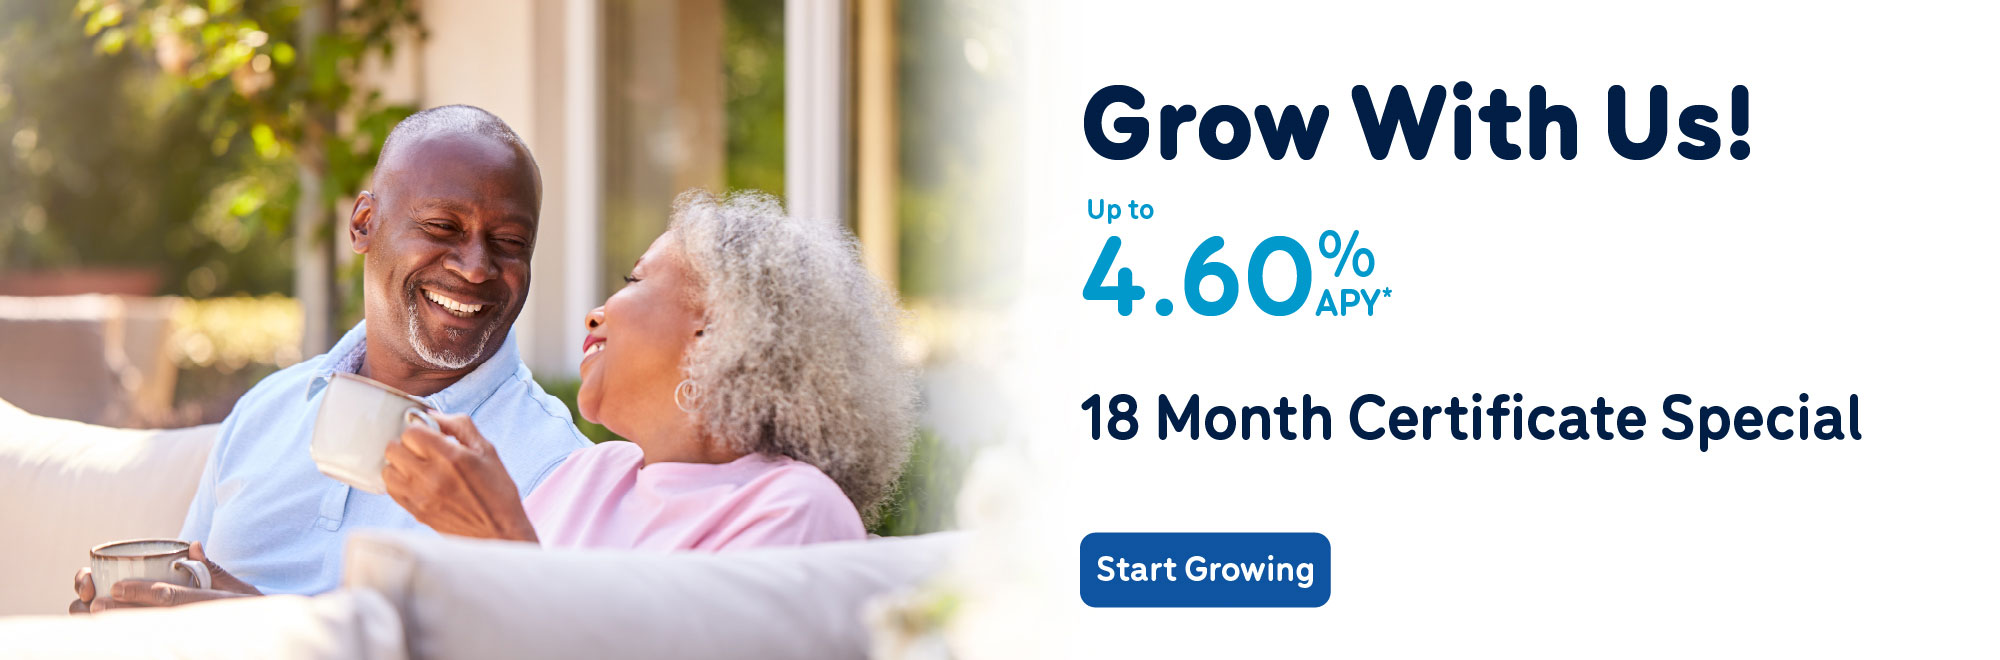 Learn how you can grow your savings with up to 4.60 Annual Percentage Yield on an 18 Month Certificate Special